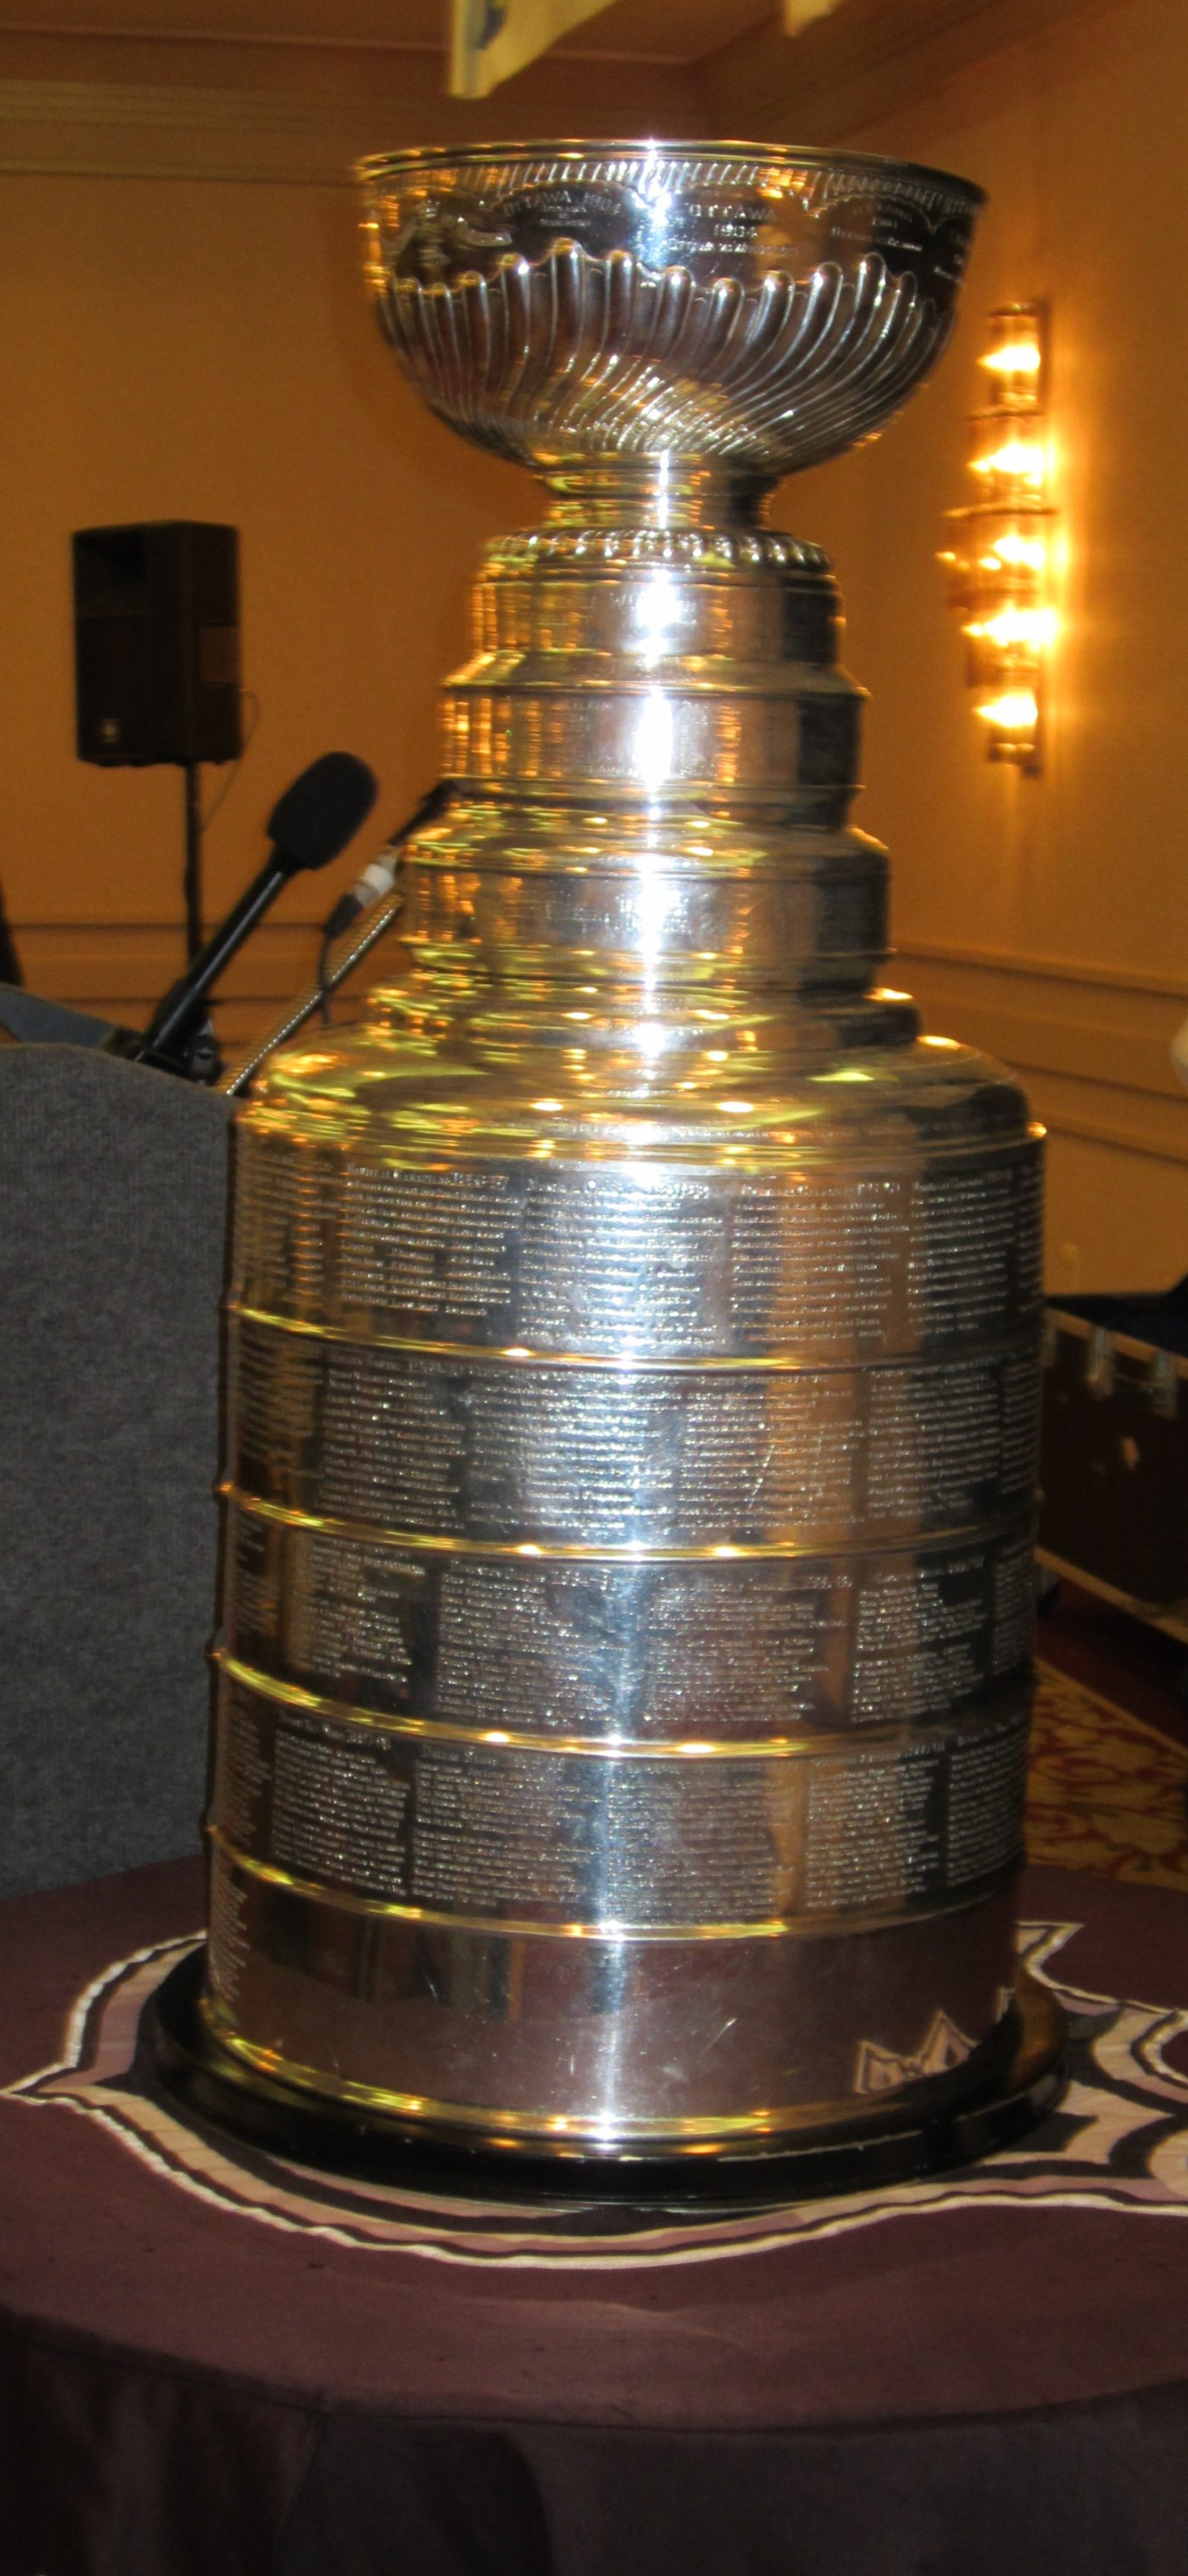 Marlborough Chamber of Commerce celebrates Stanley Cup - Community Advocate